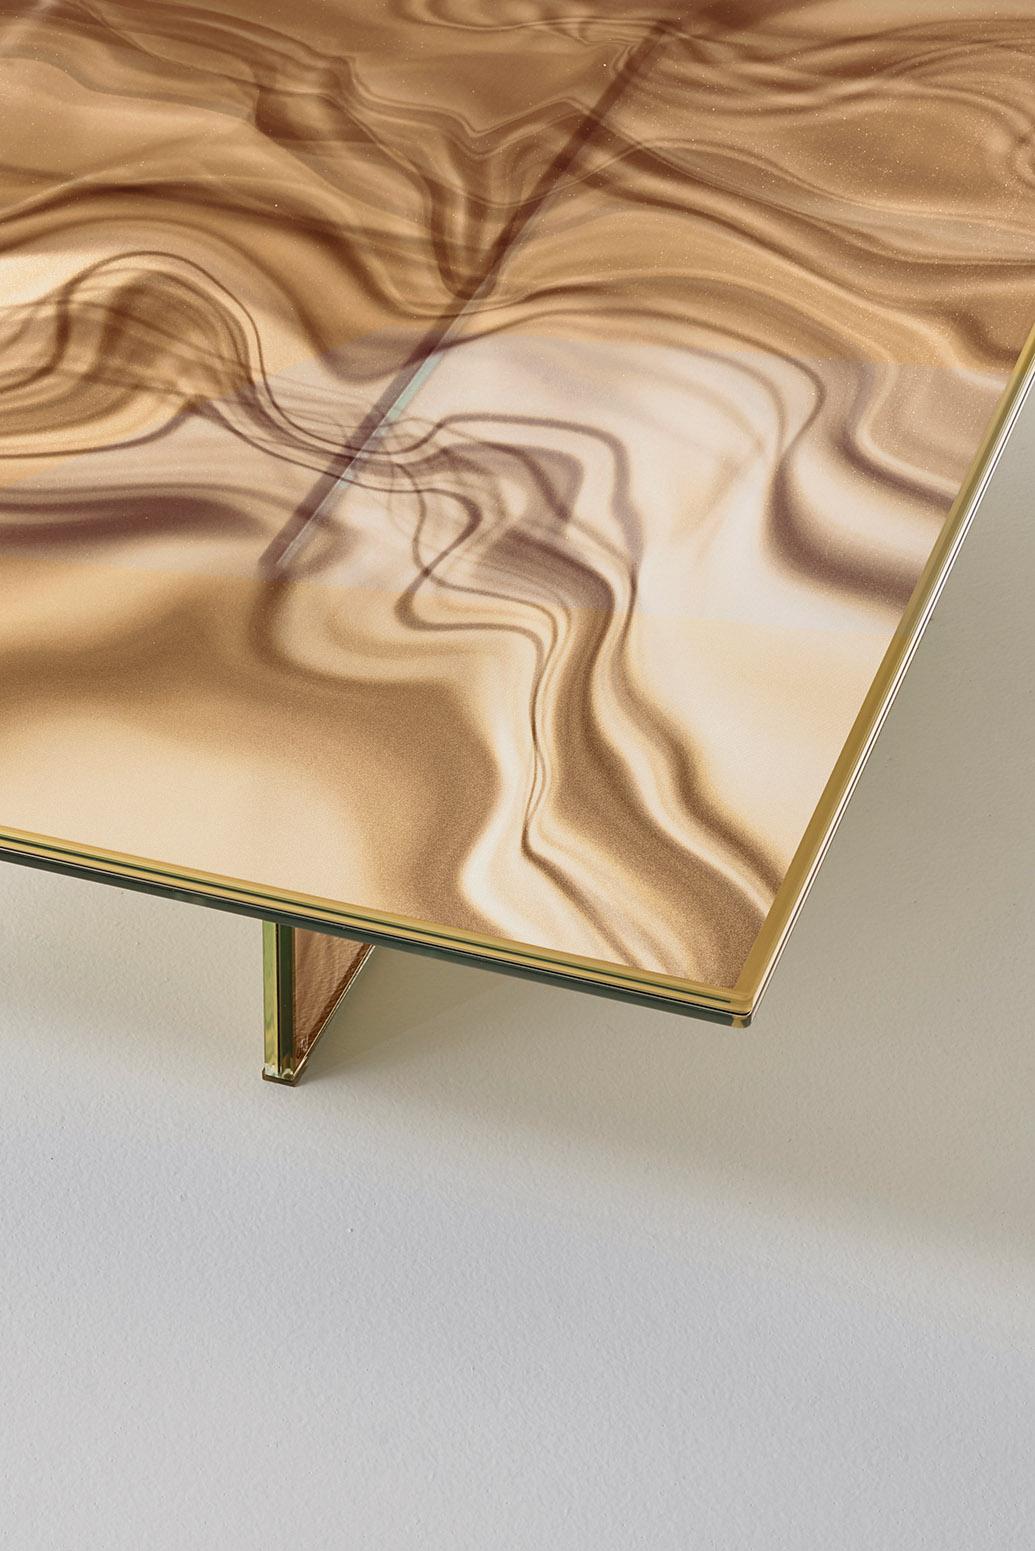 Laminated LIQUEFY Console Table, by Patricia Urquiola for Glas Italia For Sale